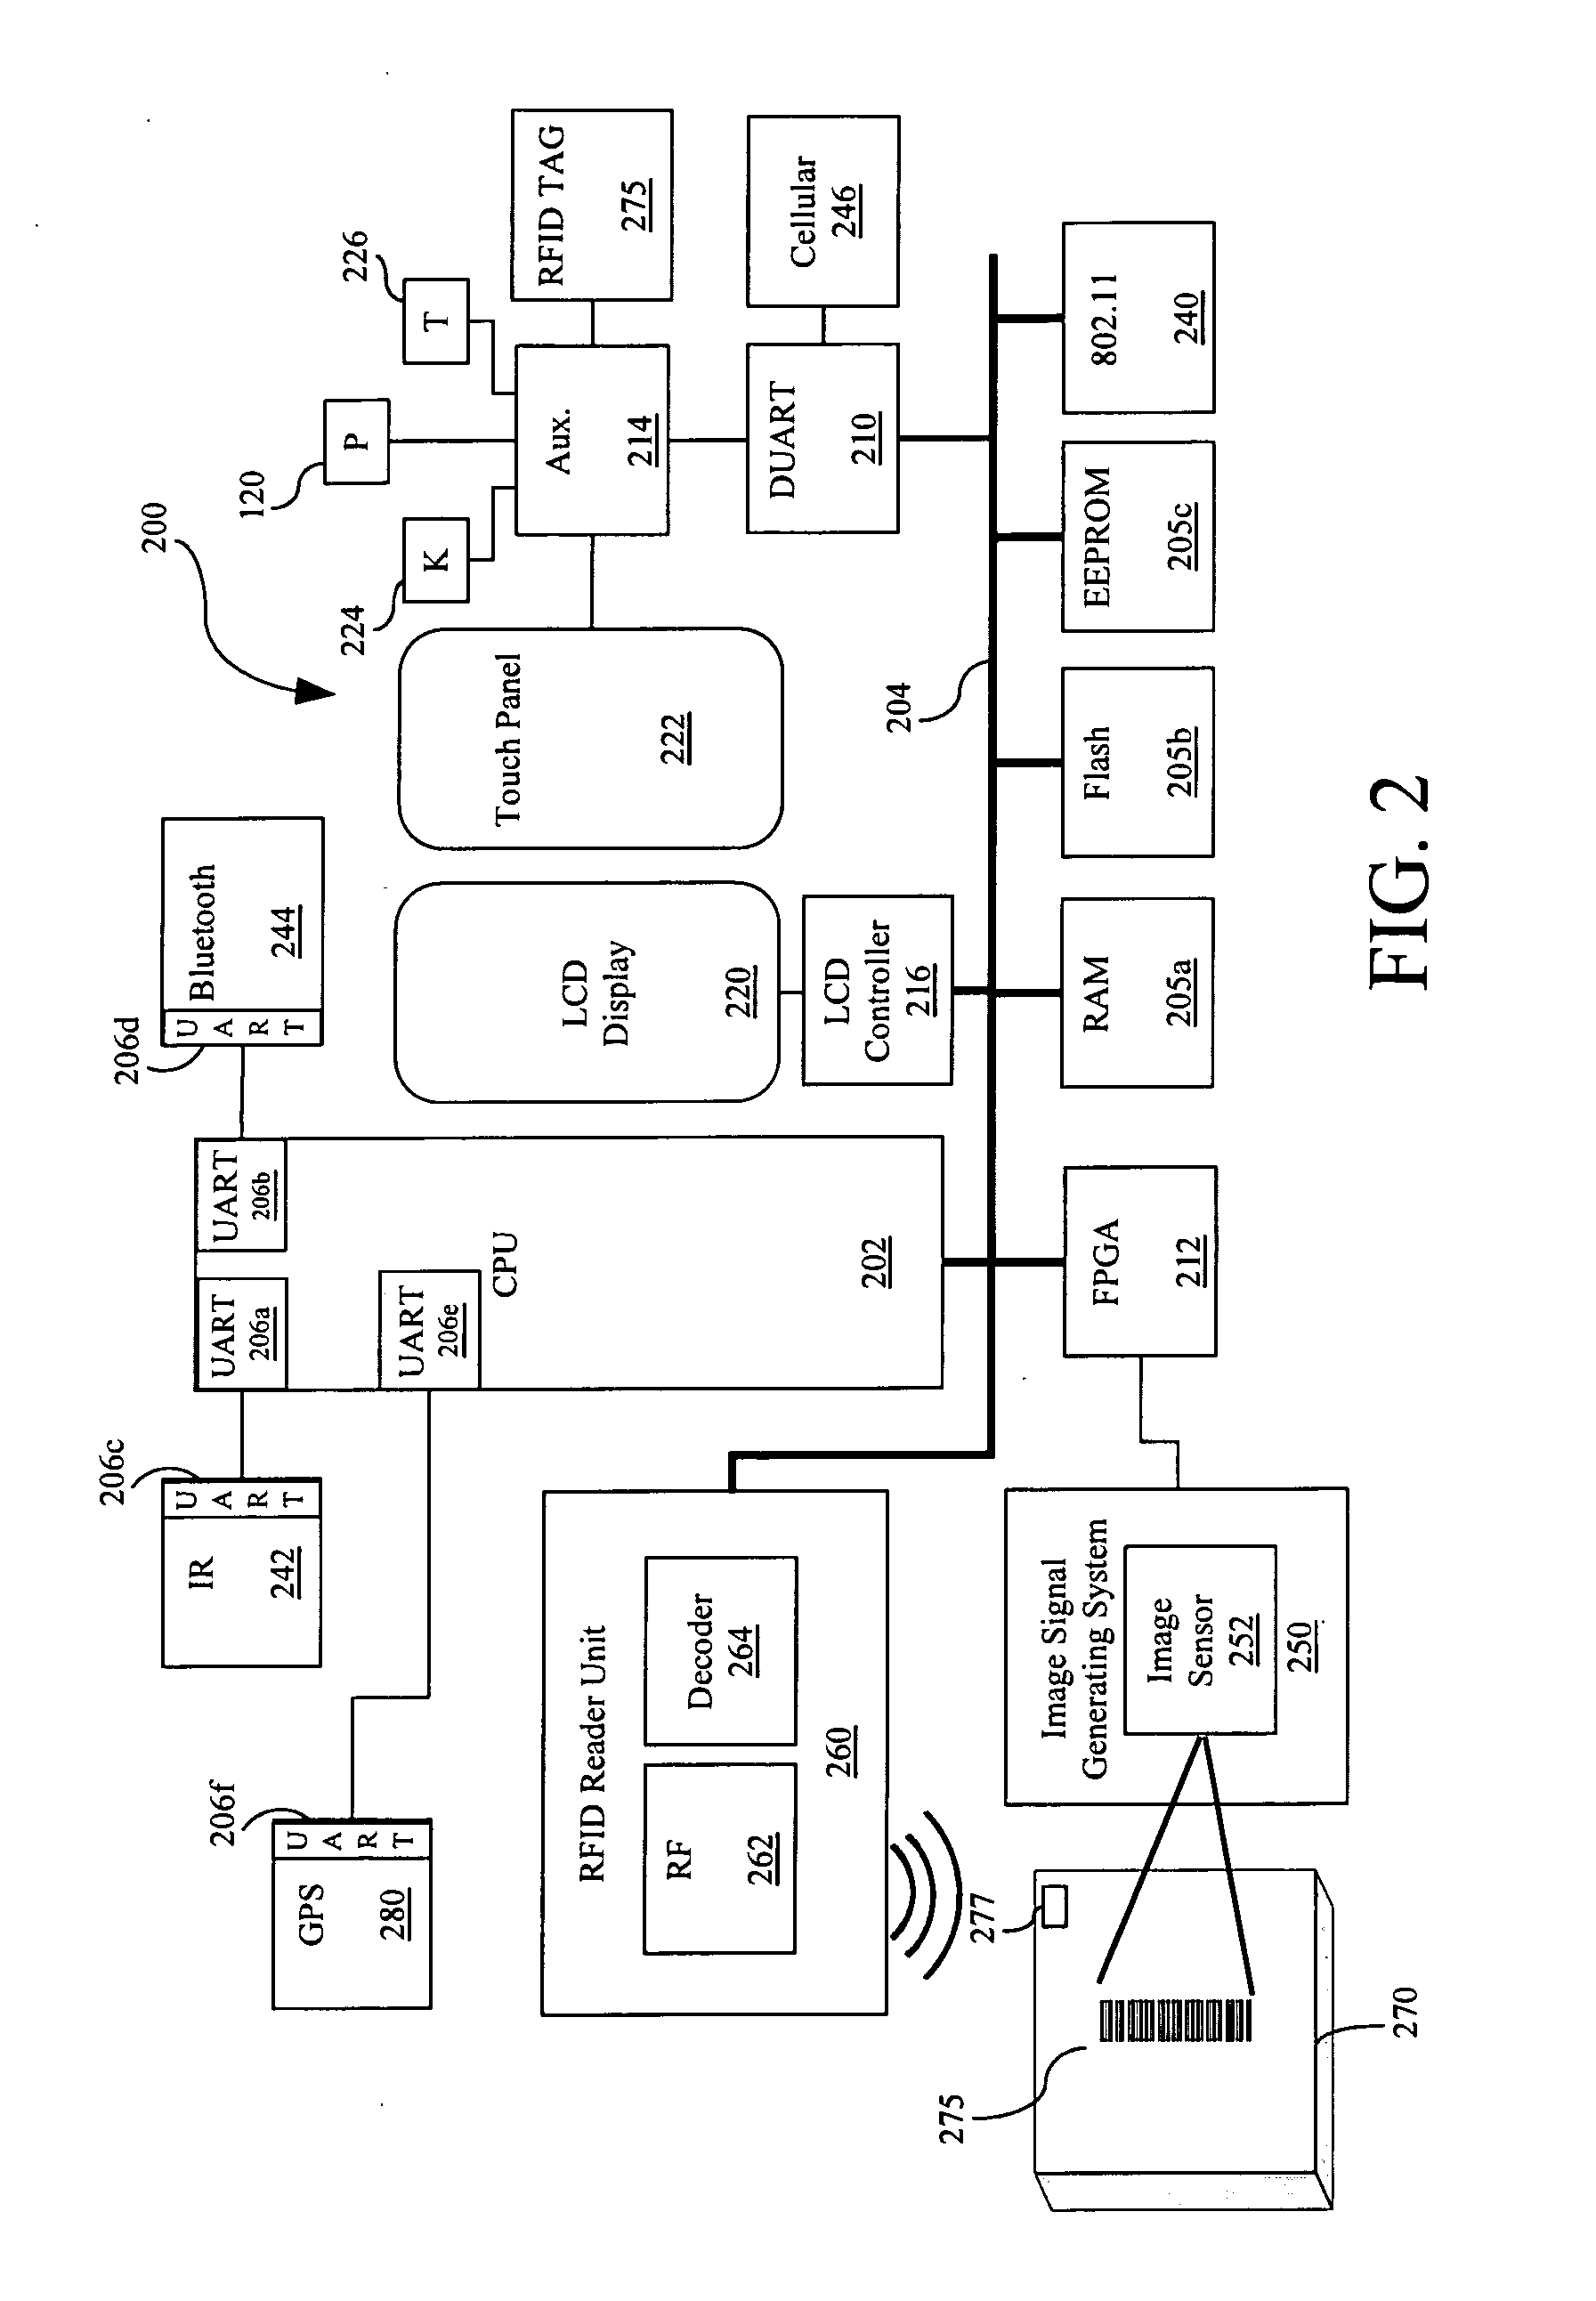 Panic Button for Data Collection Device